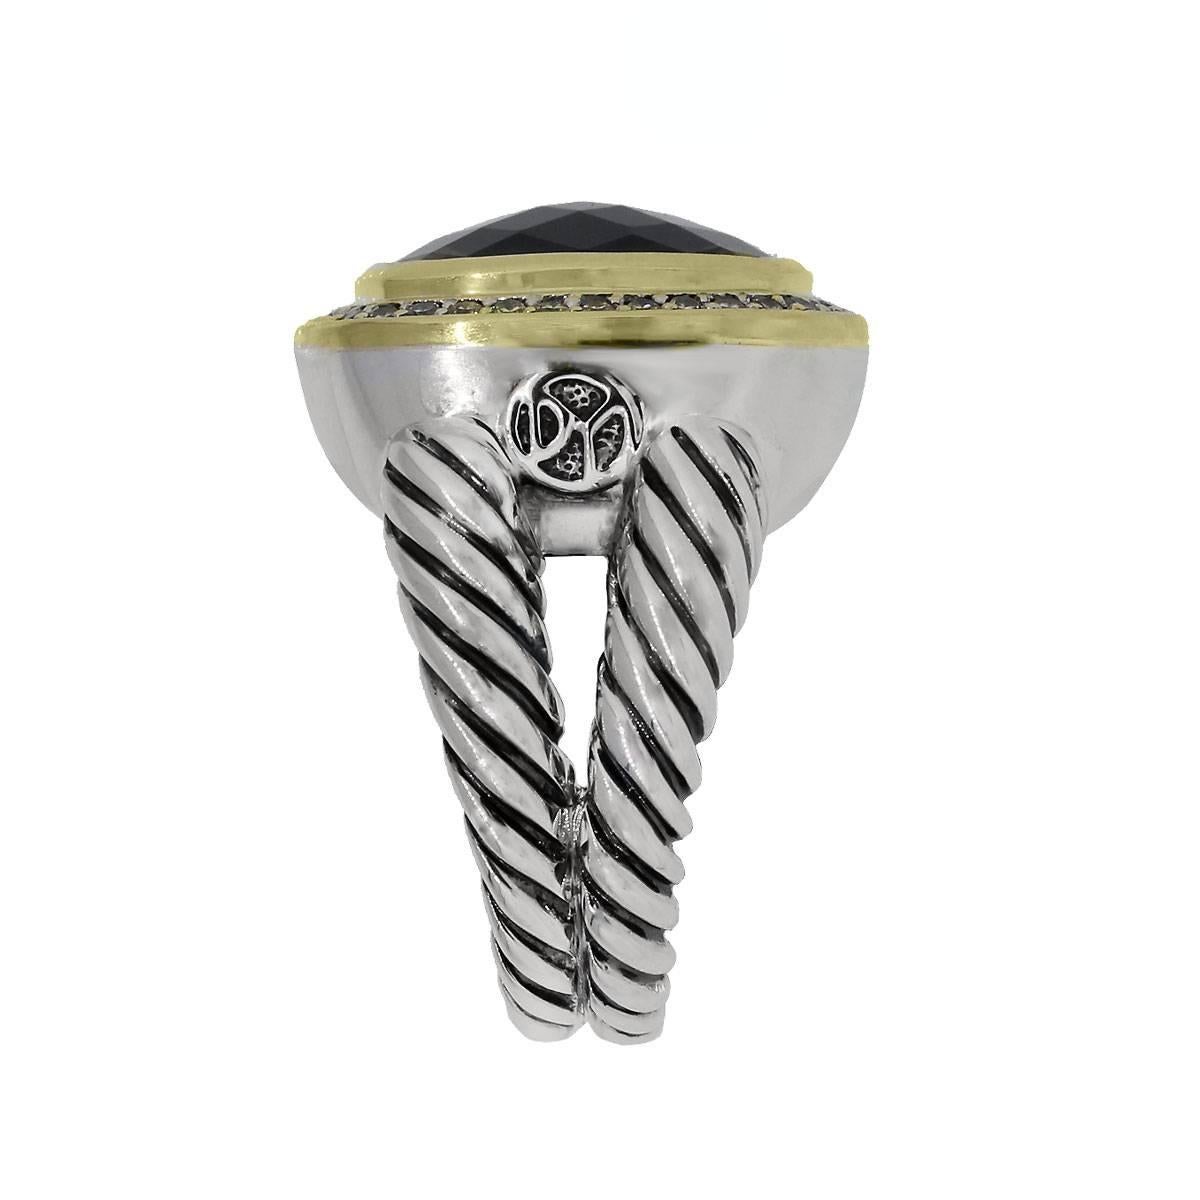 Brand: David Yurman
Material: 18k Yellow Gold & Sterling Silver
Gemstone Details: Smoky Quartz is 14mm x 14mm
Ring Size: 7 (can be sized)
Measurements: 1.10